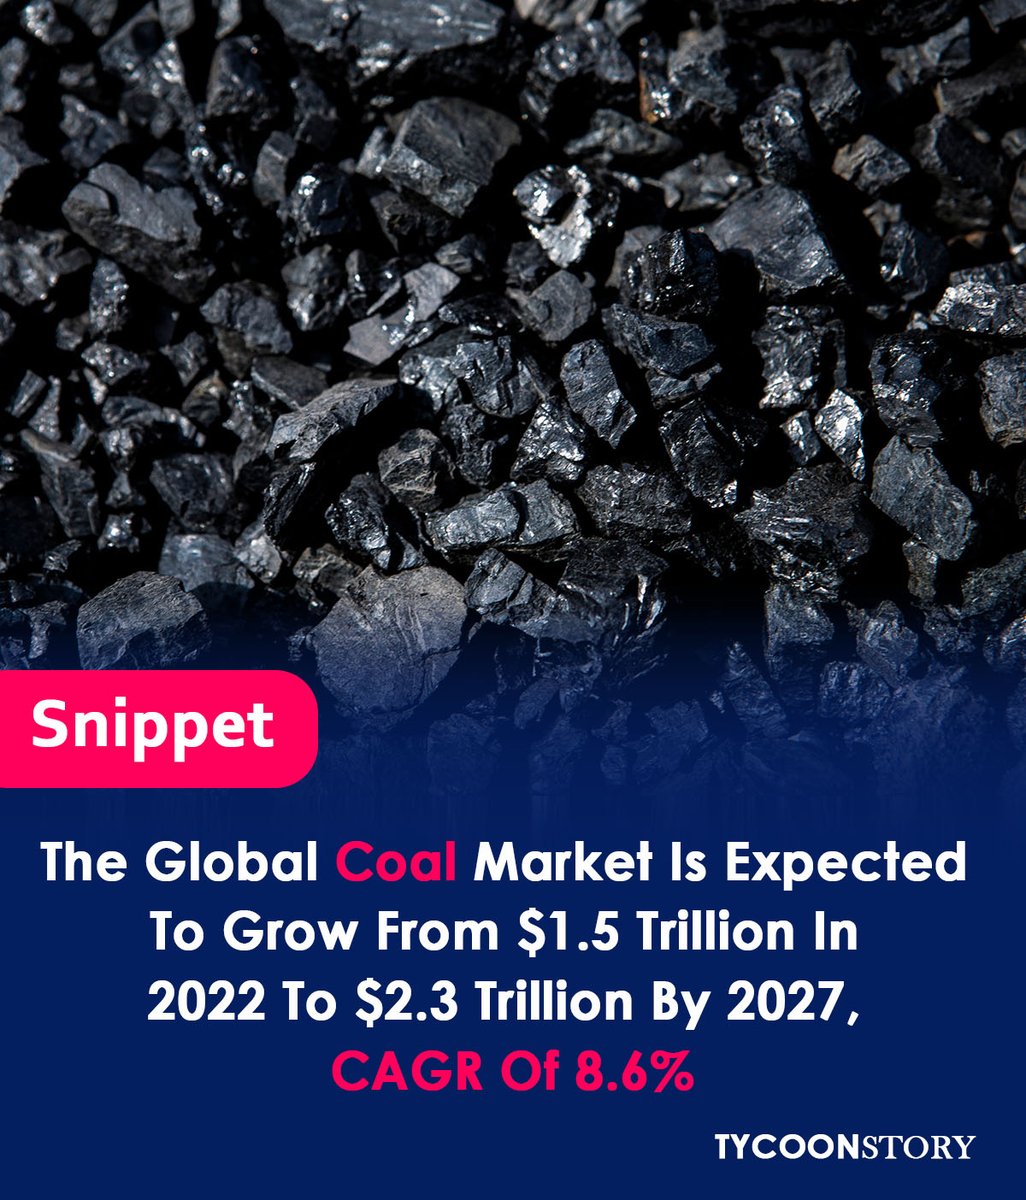 Are You Looking To Start Coal Services, Let Review The Below Market Statistics

#Electricity #globalmarket #powergeneration #marketshare #coalmining #thermalcoal #steel #technologicalinnovation #coalpower #fossilfuels #carbonfootprint #environment #blackgold #charcoal @bhp